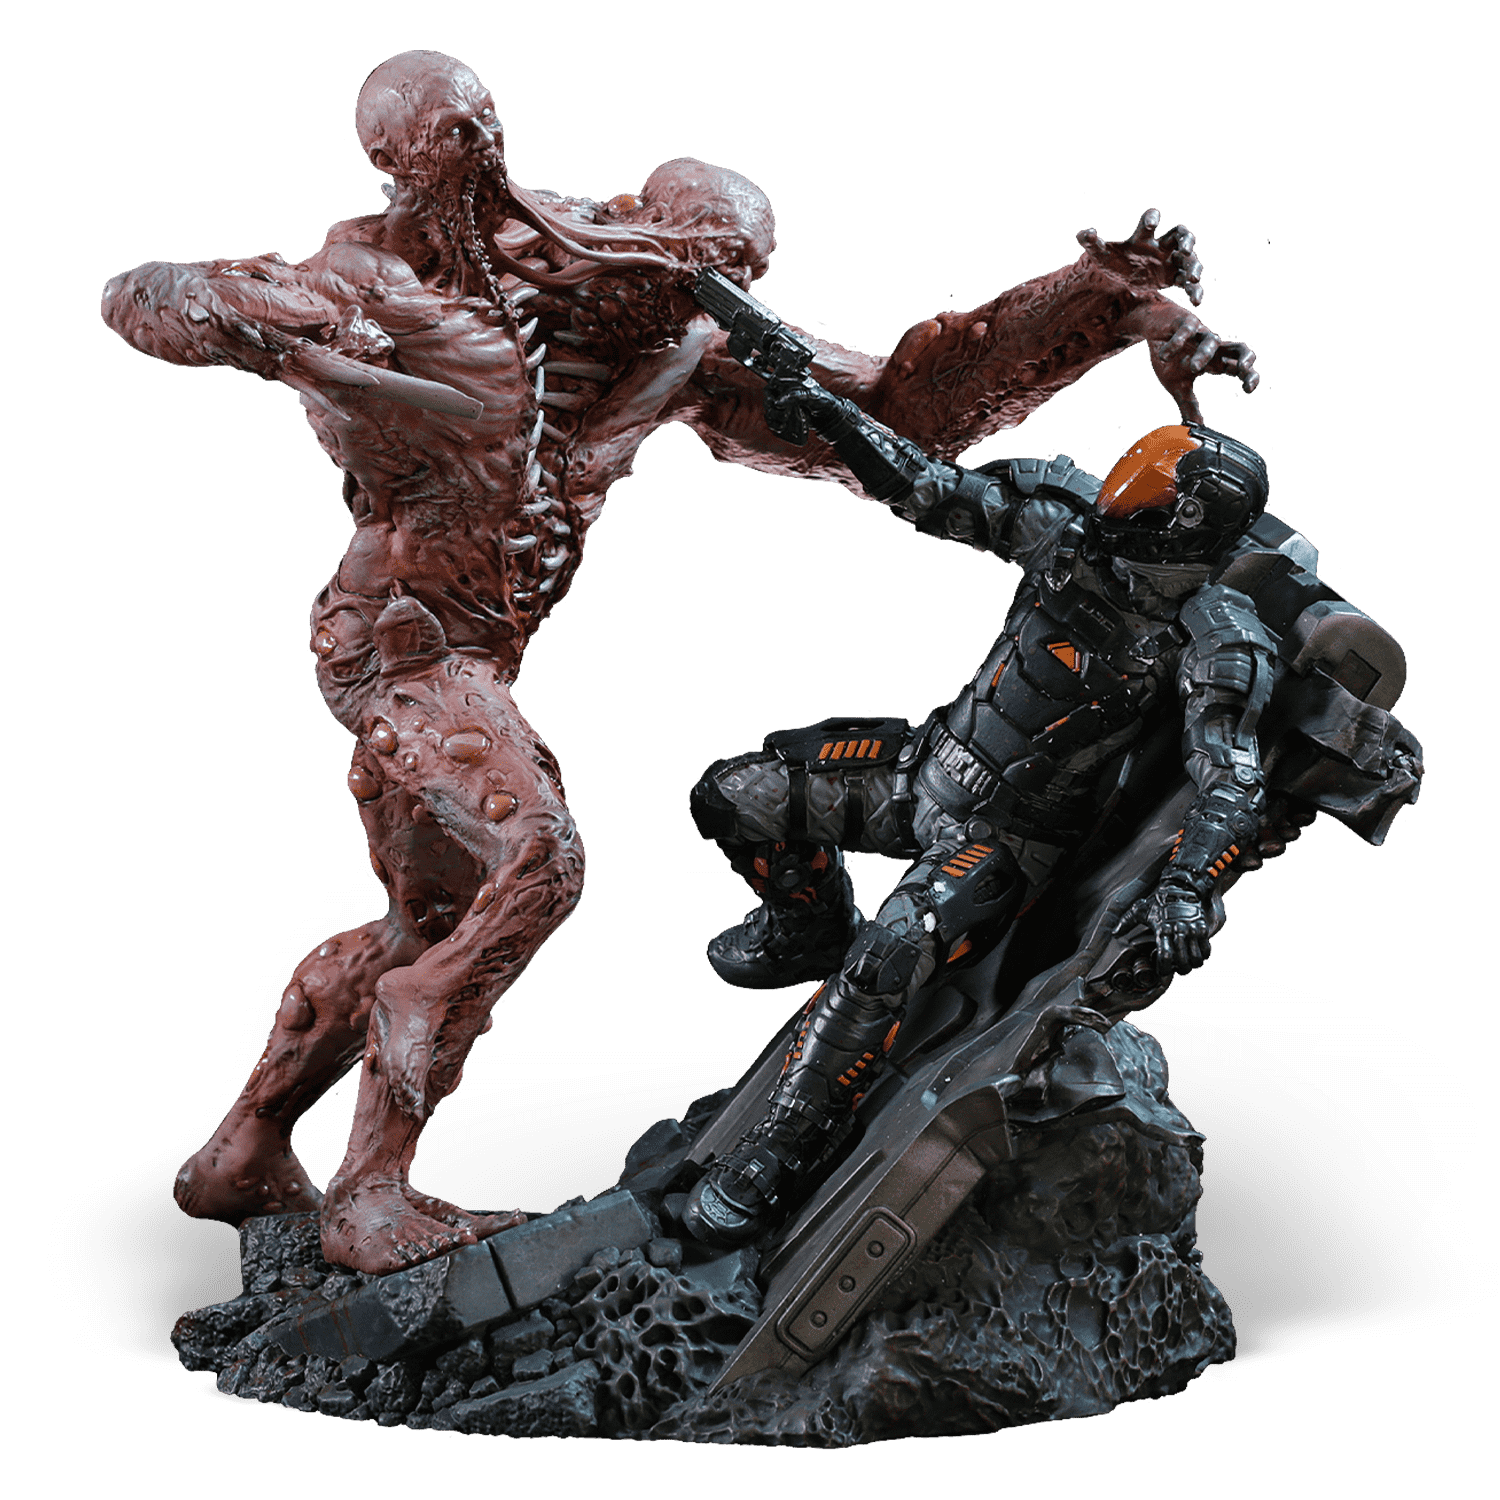 US THE CALLISTO PROTOCOL FINAL TROPHIES AND COLLECTIBLES